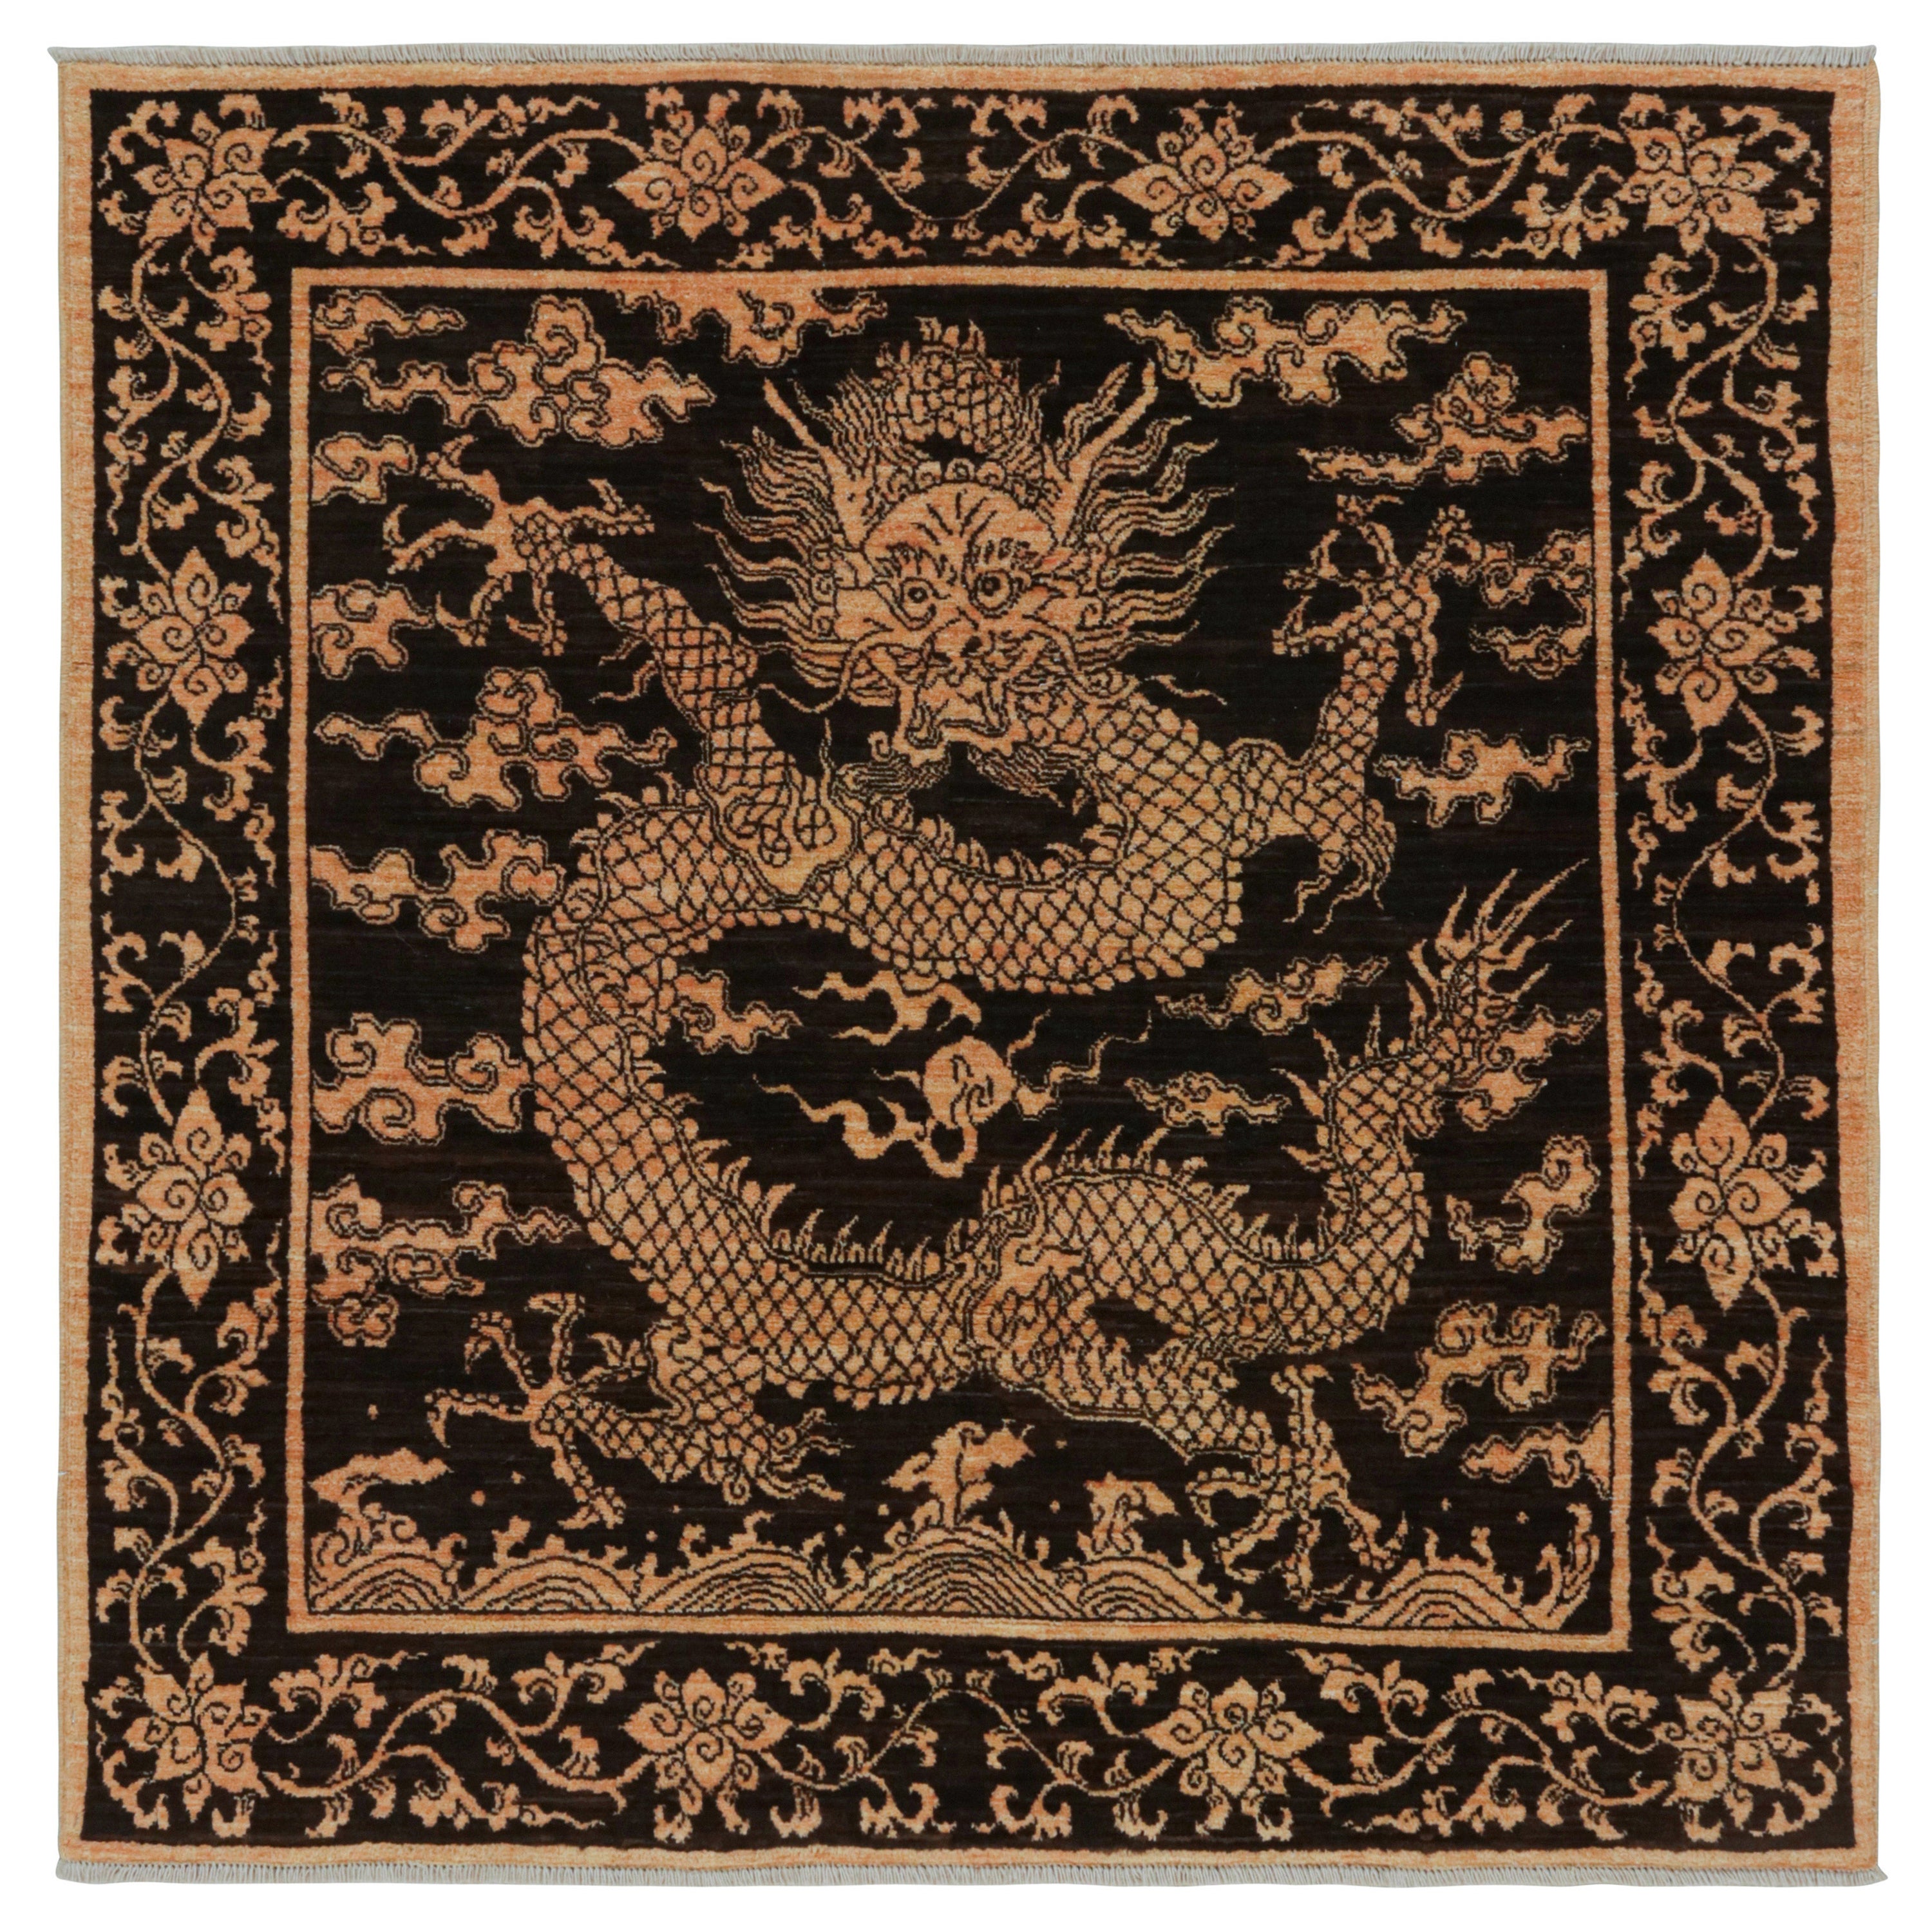 Rug & Kilim's Chinese style Dragon Rug with Brown, Black and Gold Pictorials